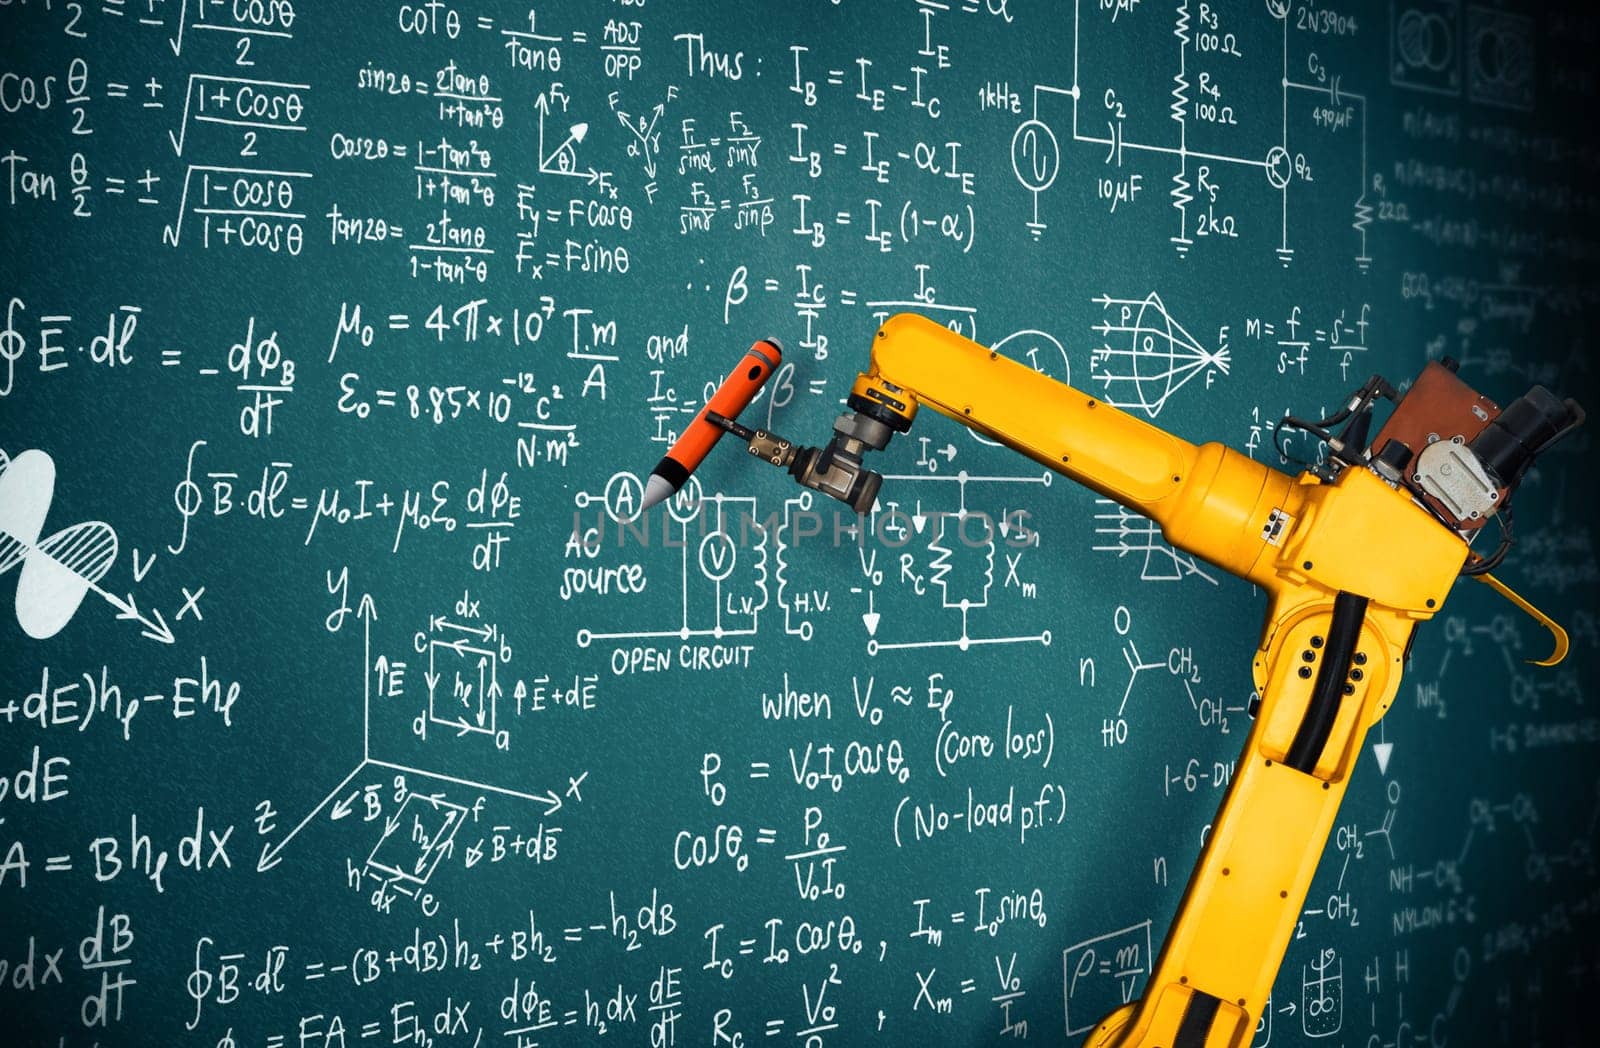 XAI Robot arm AI analyzing mathematics for mechanized industry problem solving. Concept of robotics technology and machine learning for automated manufacturing process.